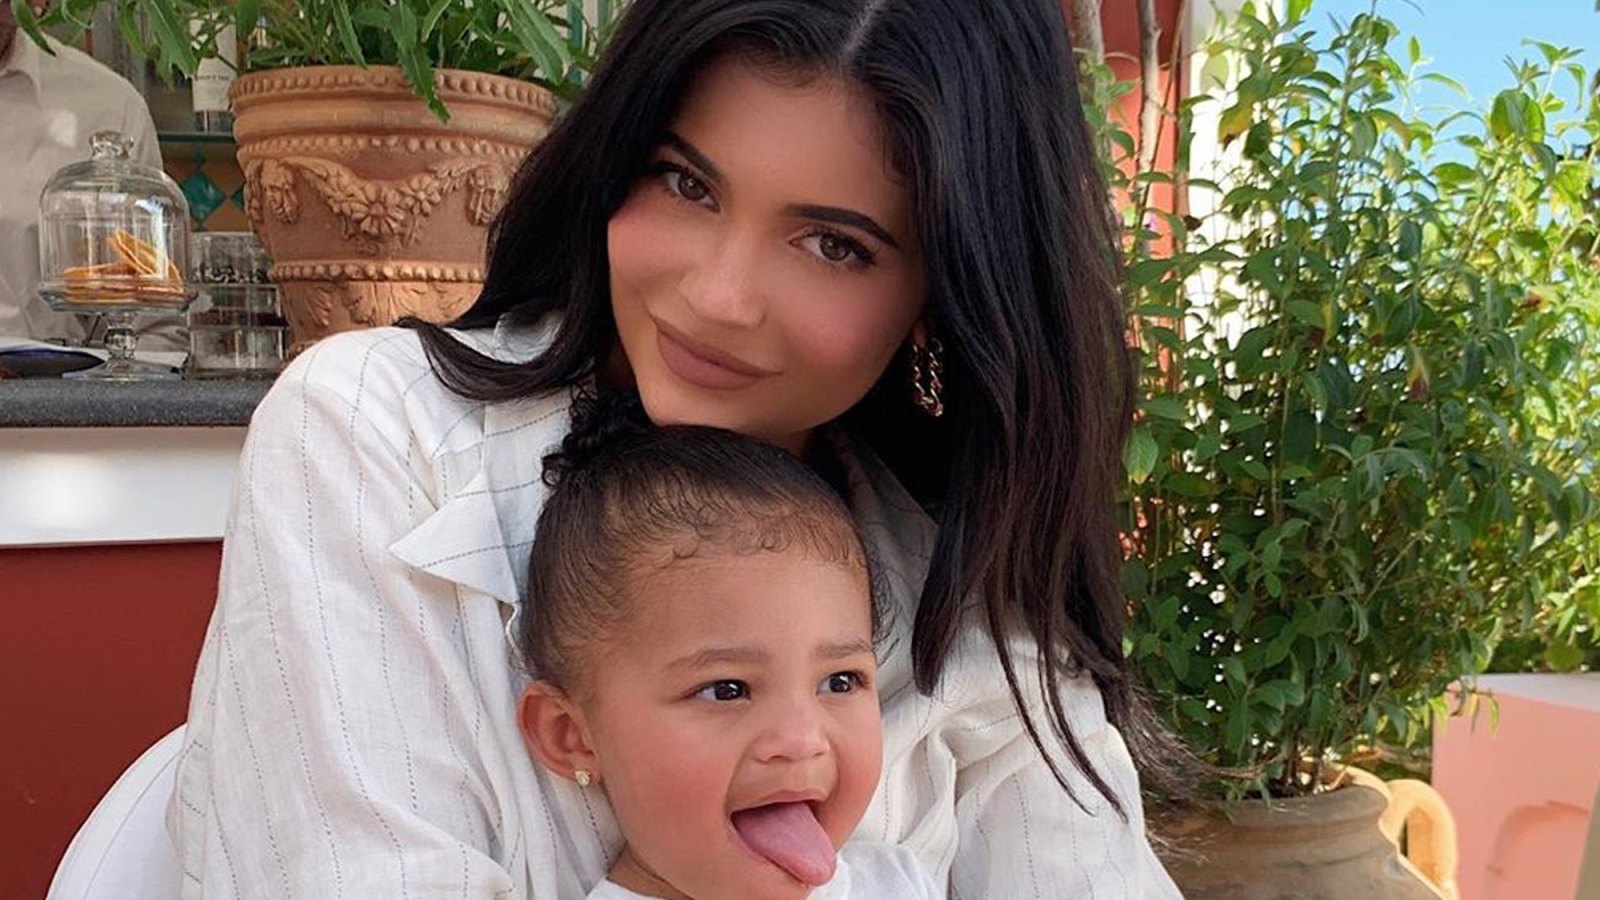 Kylie Jenner Shares Video of Stormi Singing Viral Hit ‘Rise and Shine’